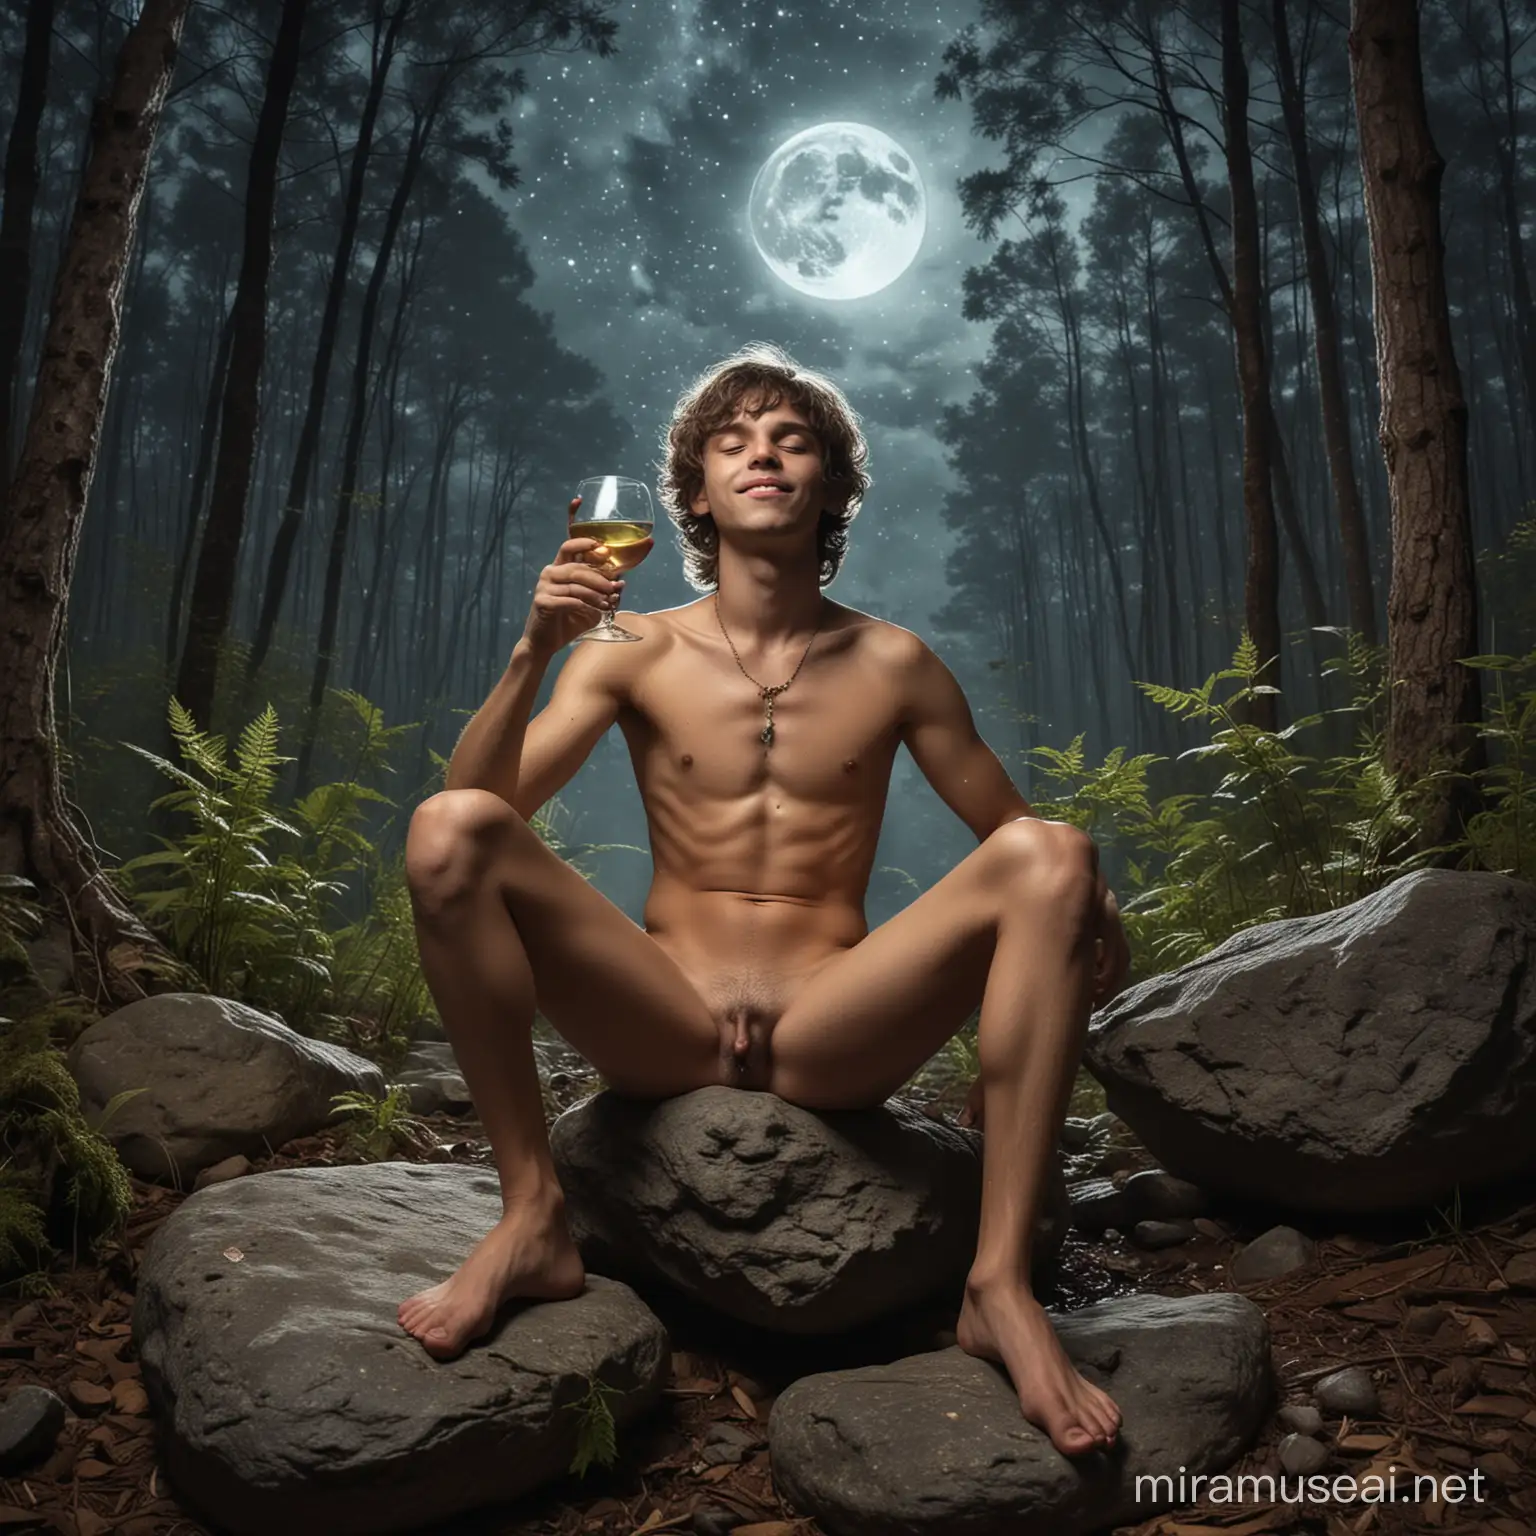 Psychedelic Forest Encounter Young Anthropomorphic Boy Relaxing with Wine and Cannabis under the Moonlight